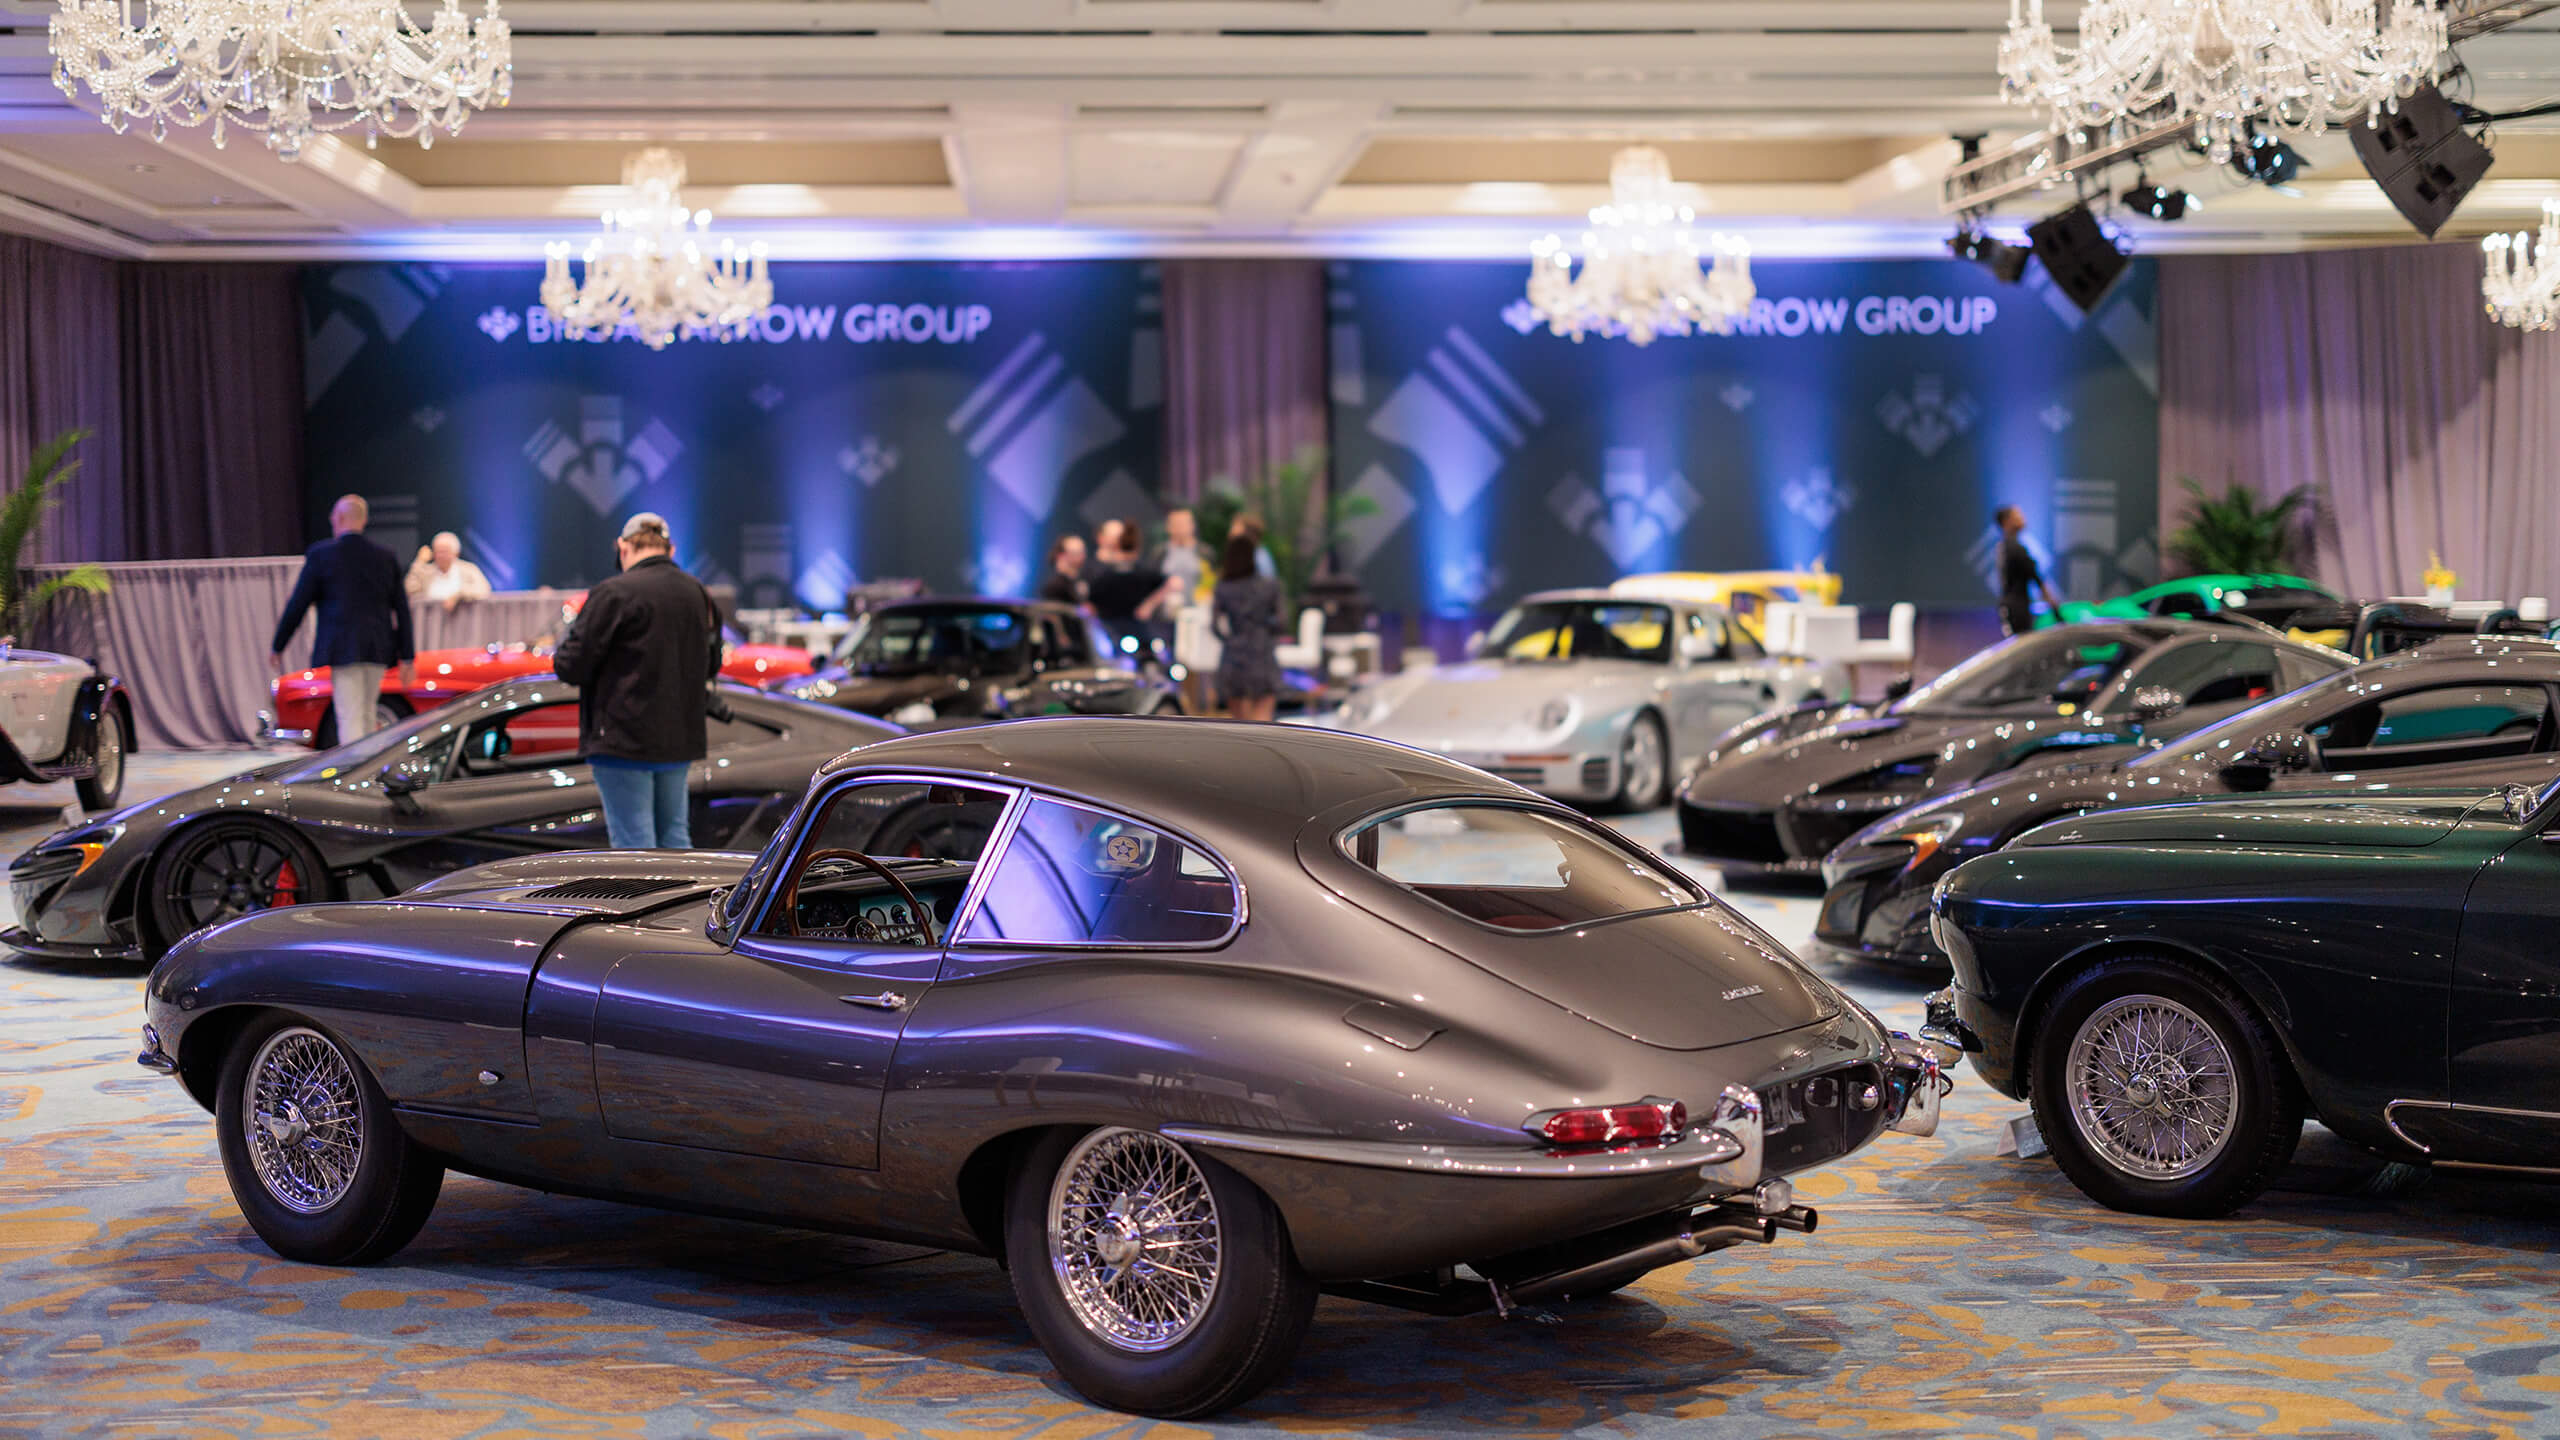 Broad Arrow’s debut auction at the Amelia Island Concours